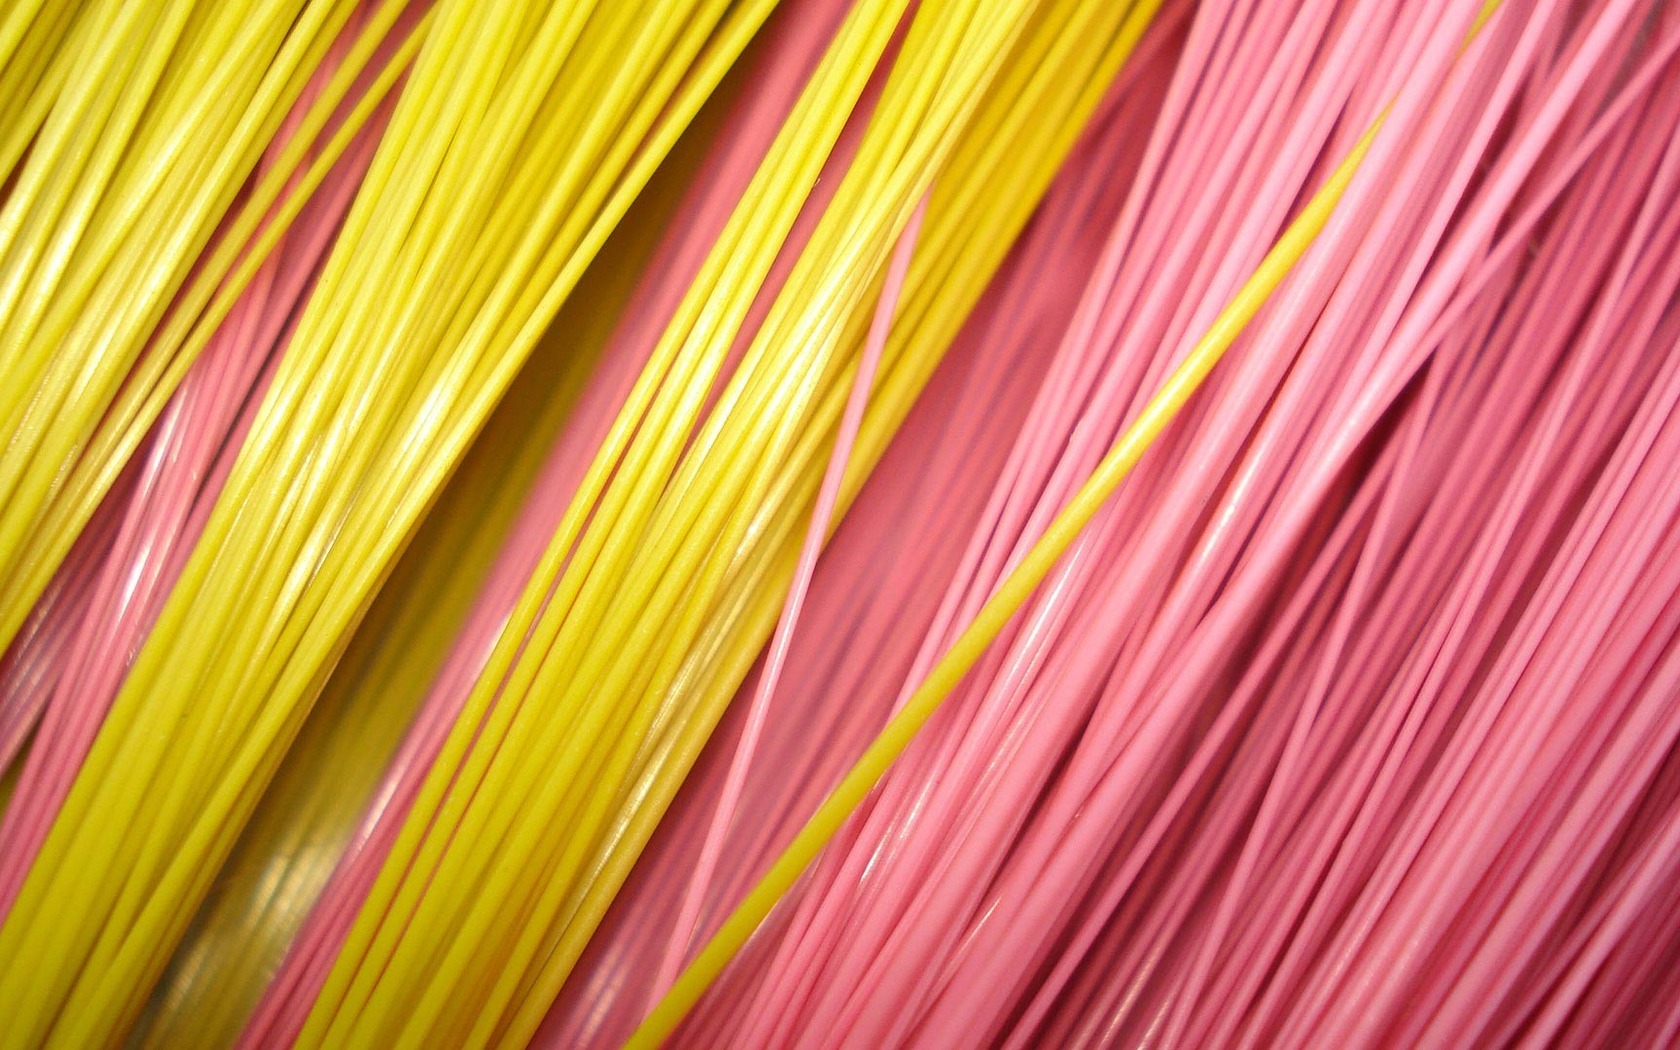 Pink And Yellow Wires Wallpaper